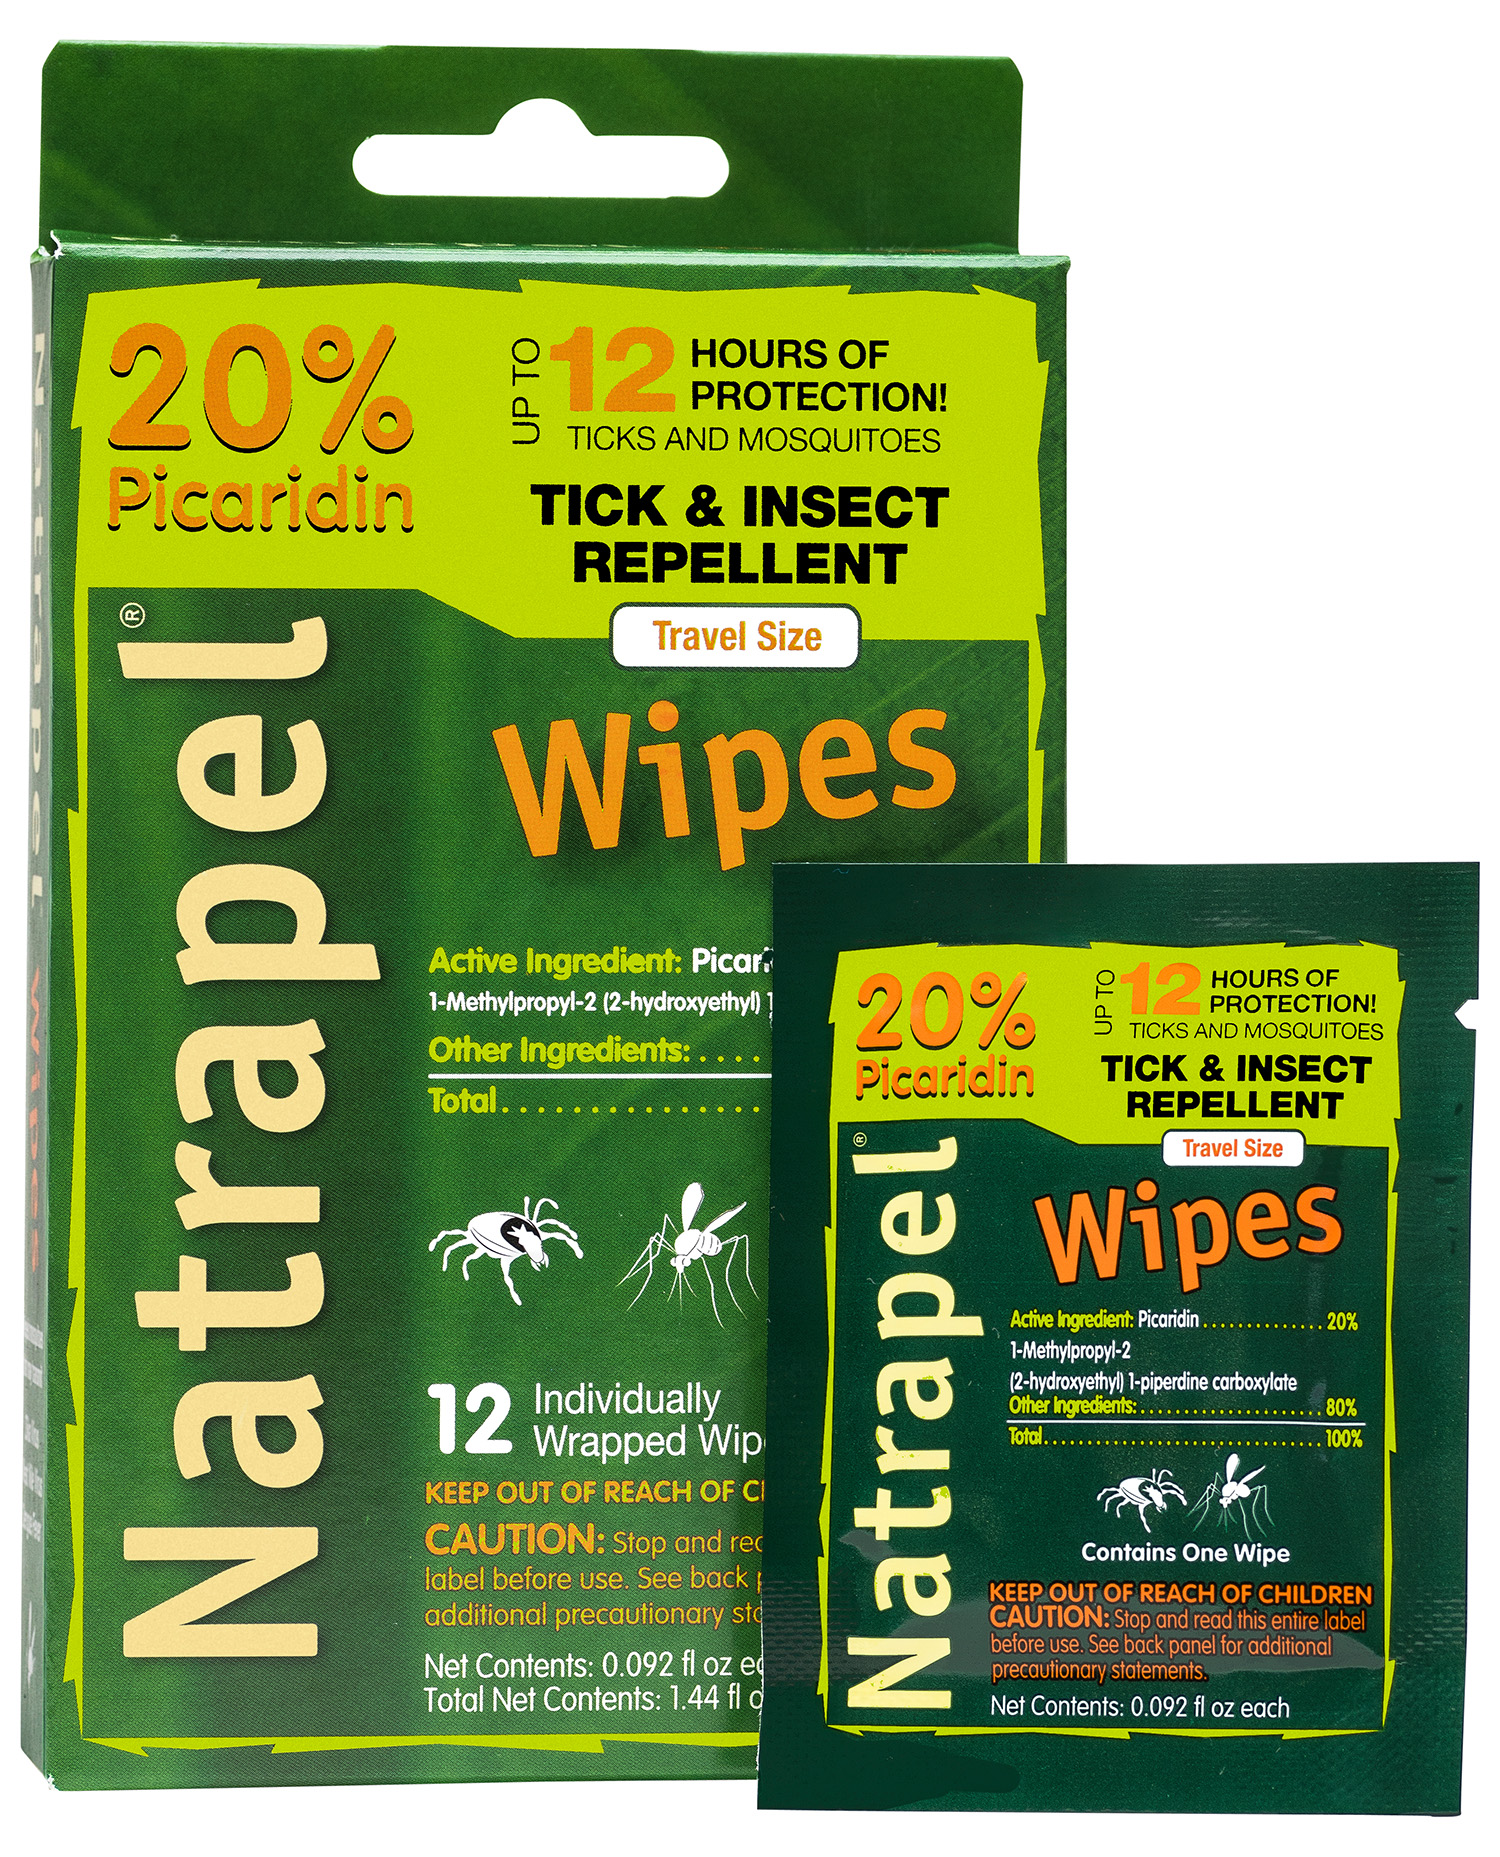 Natrapel 00066095 Repellent Wipes  Repels Ticks & Biting Insects Effective Up to 12 hrs 12 Per Box